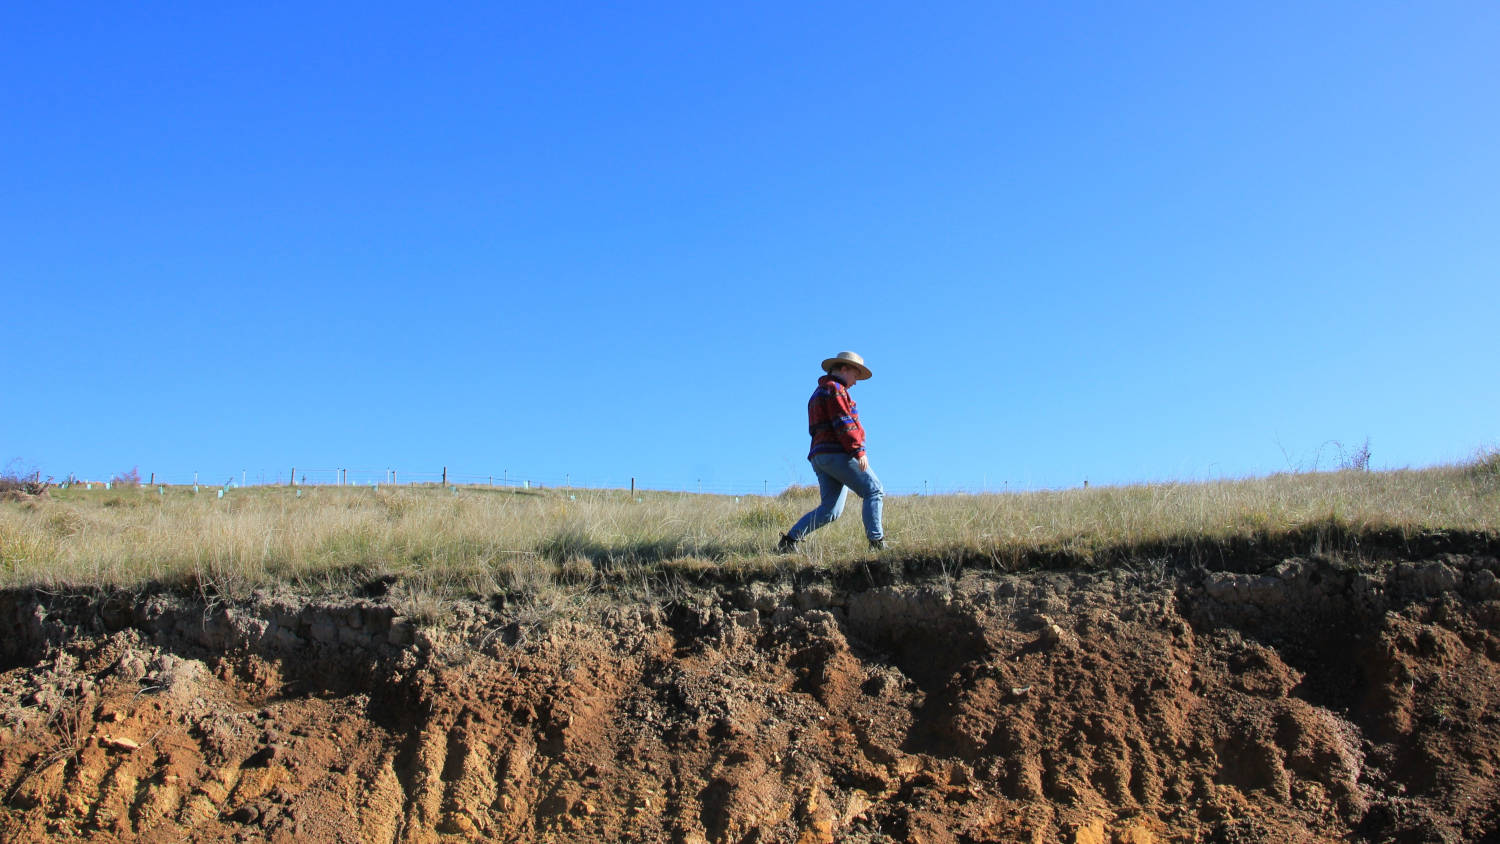 Lone figure of a person walking across a dry field, with eroded cliffs in the foreground and a bright blue sky